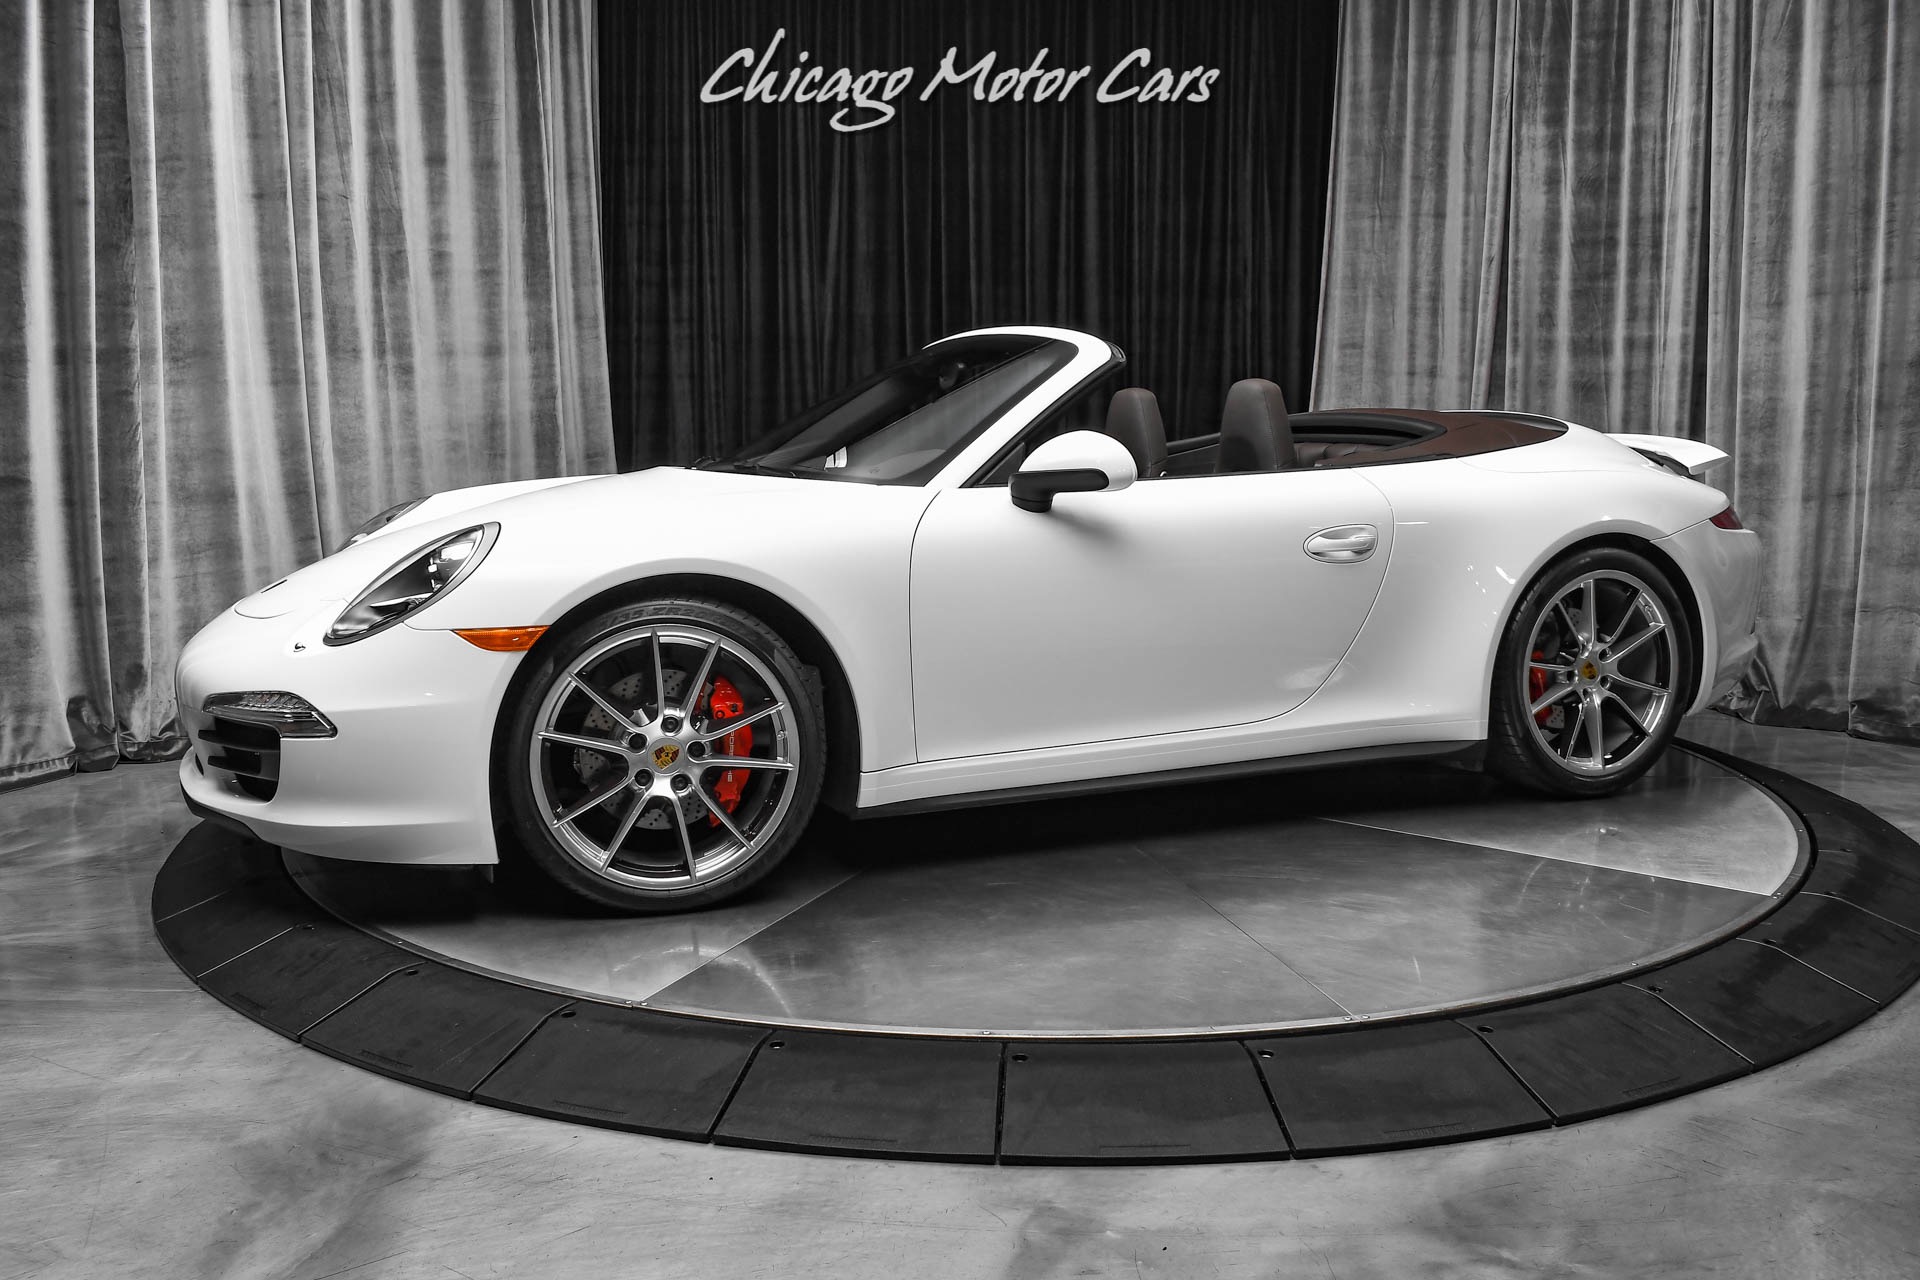 Used 2013 Porsche 911 Carrera 4S Cabriolet 7-SPEED MANUAL! RARE MAHAGONY  TRIM! ONLY 6,900 MILES! For Sale (Special Pricing) | Chicago Motor Cars  Stock #18504